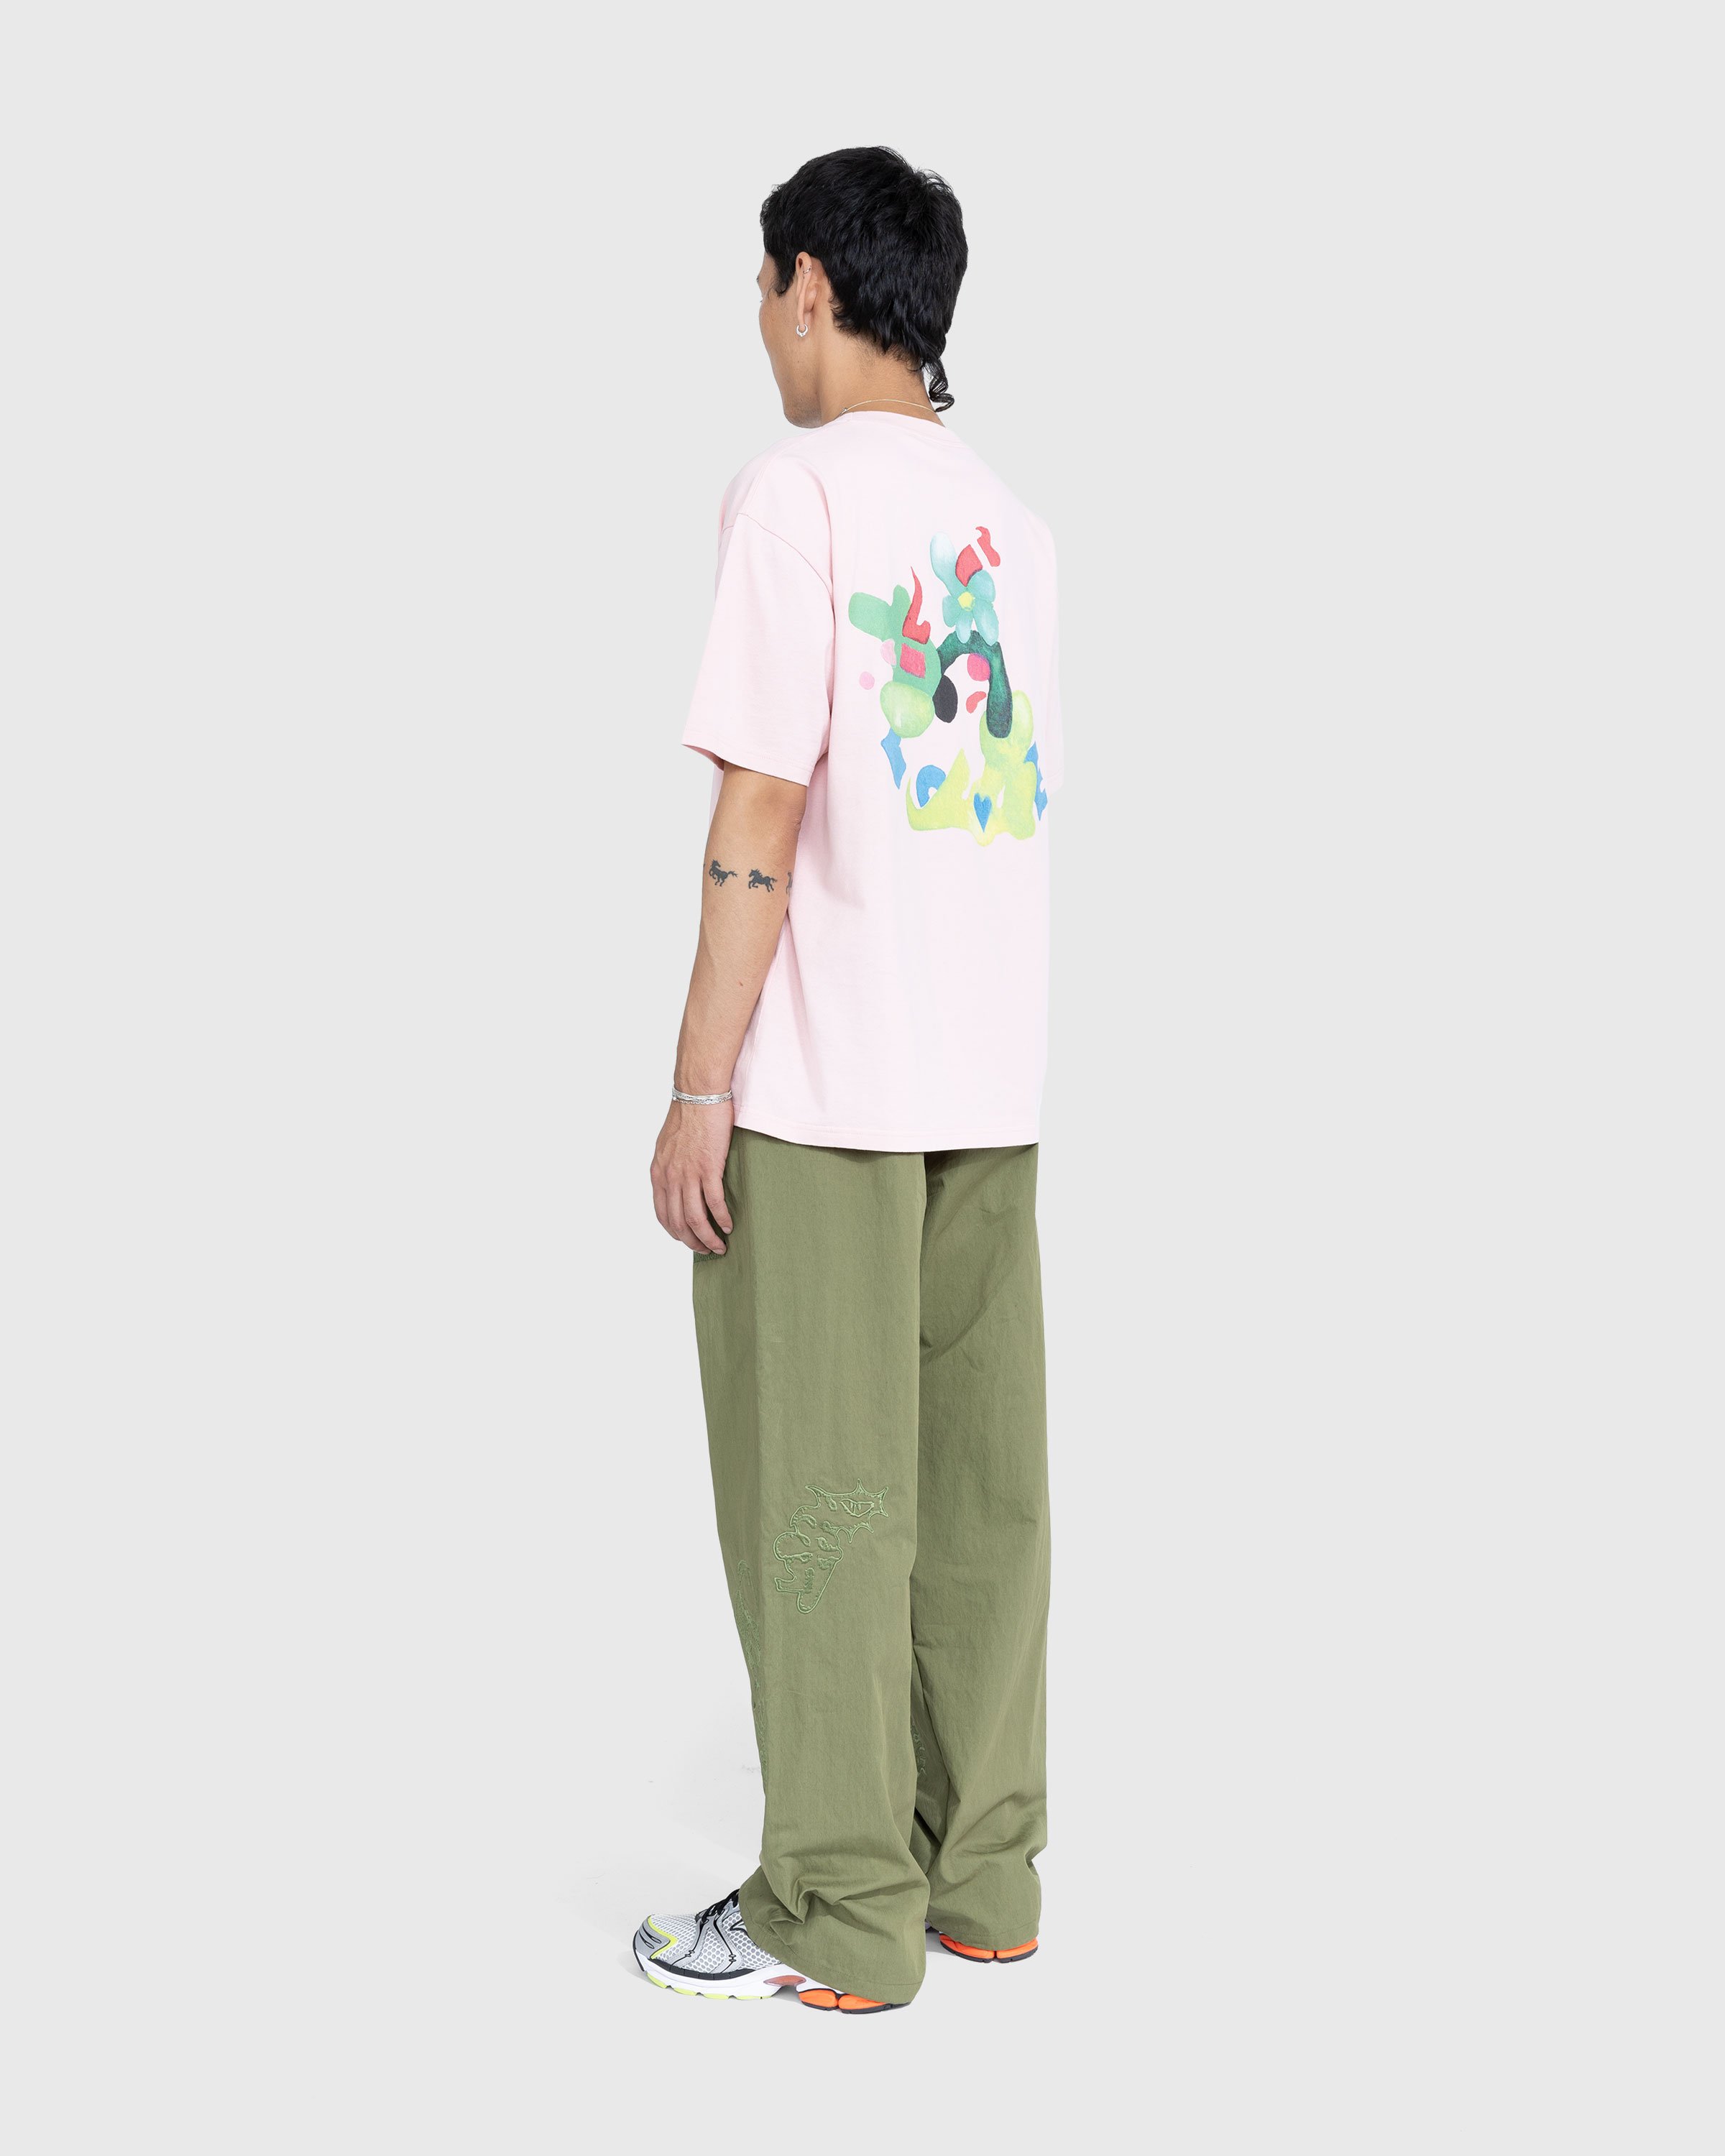 NTS x Highsnobiety - Graphic T-Shirt Pink - Clothing - Pink - Image 4